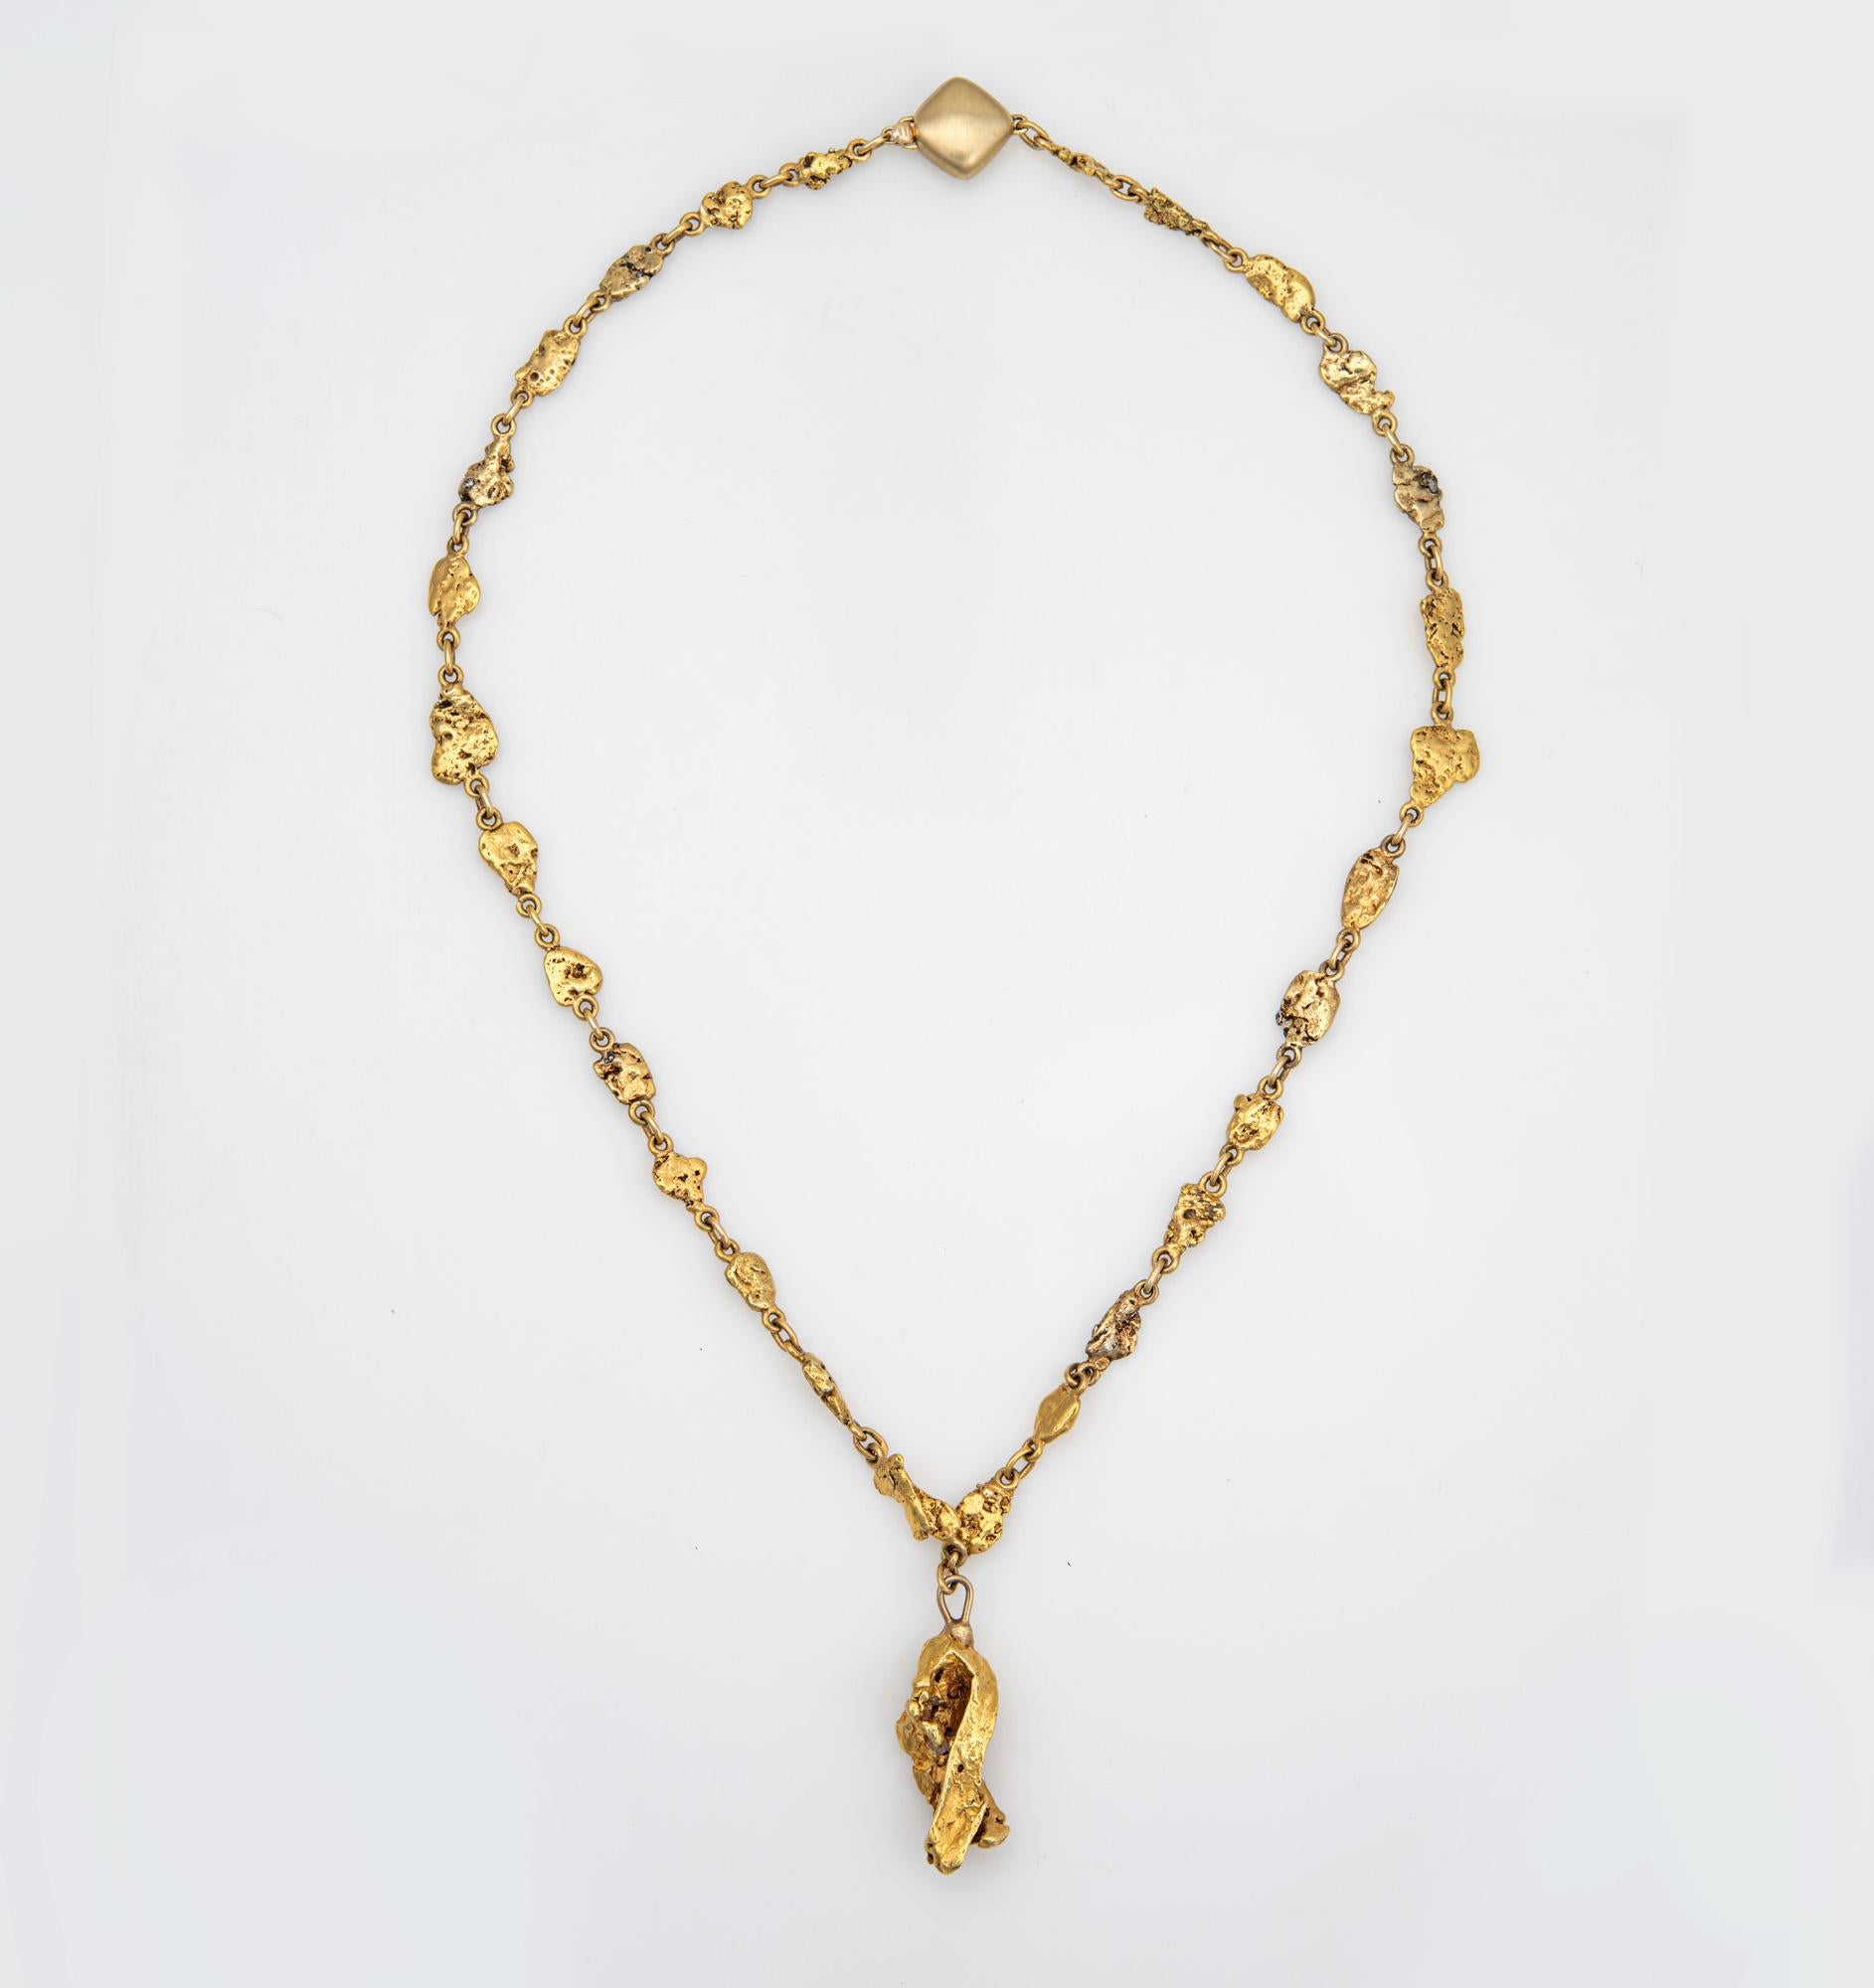 Finely detailed antique Victorian gold nugget necklace (circa 1880s to 1900s), crafted with a 14 karat yellow gold chain and 22k to 24k natural gold nuggets. 

The bold and distinct Victorian era necklace highlights a beautiful display of 28 natural